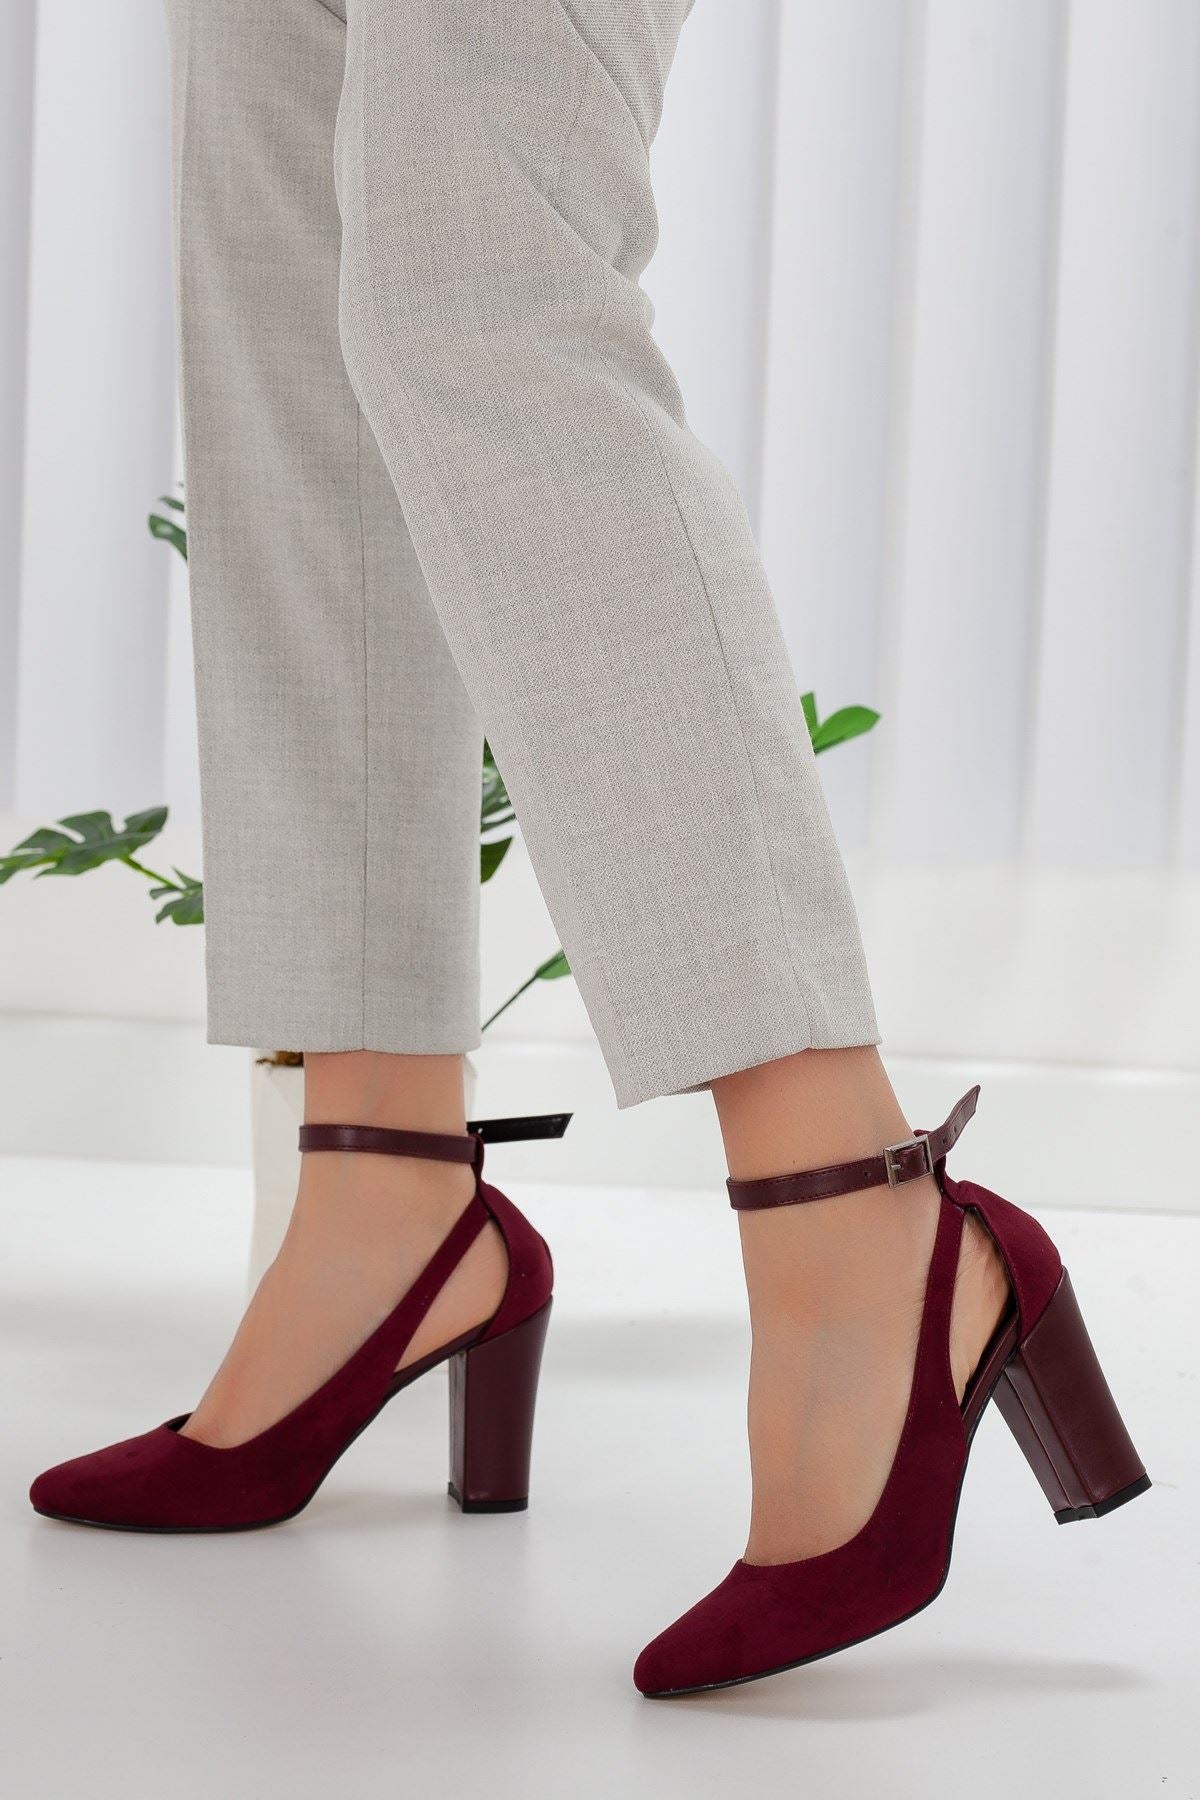 Women's Lillian Claret Red Suede Heeled Shoes - STREETMODE™